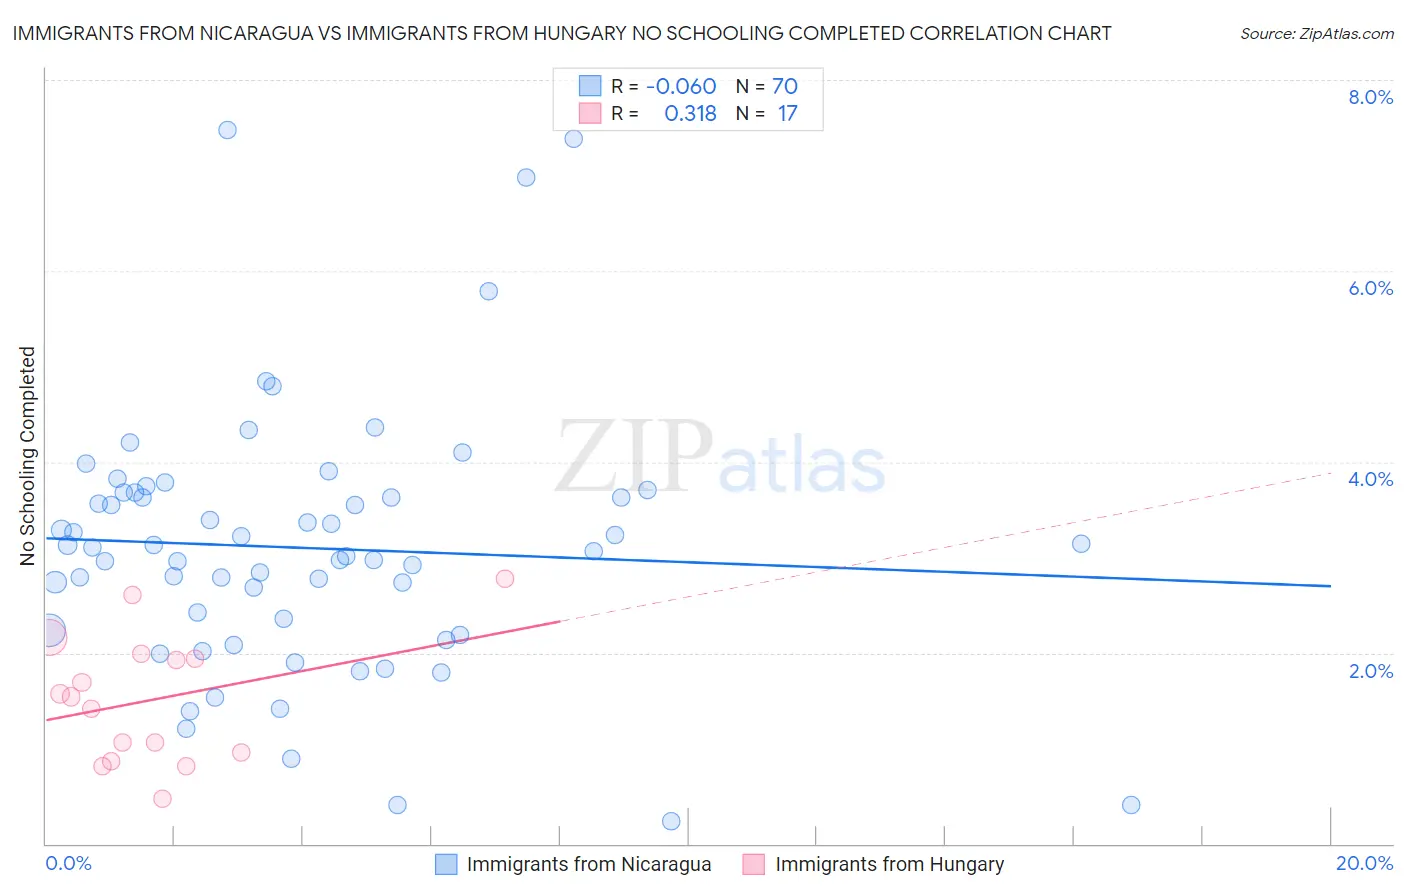 Immigrants from Nicaragua vs Immigrants from Hungary No Schooling Completed